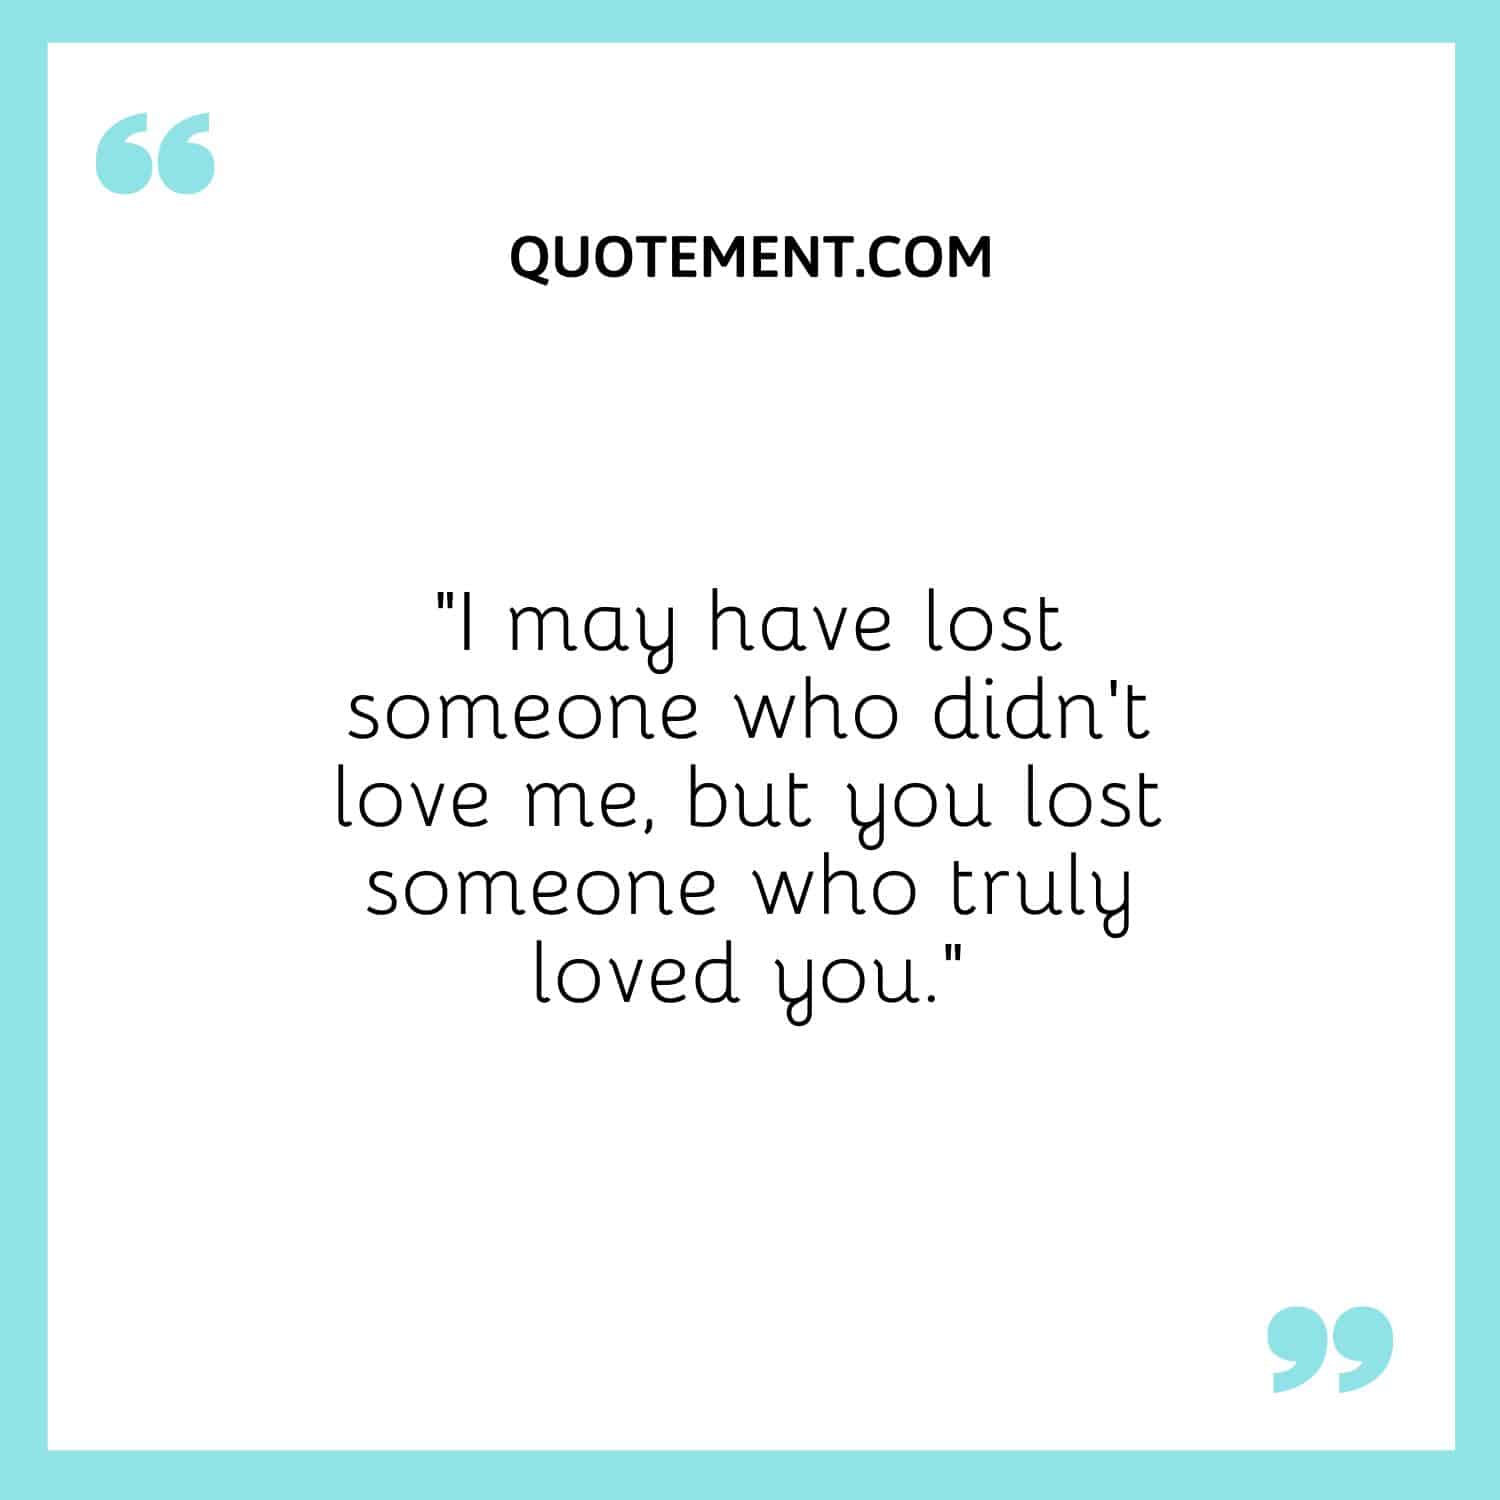 you lost someone who truly loved you